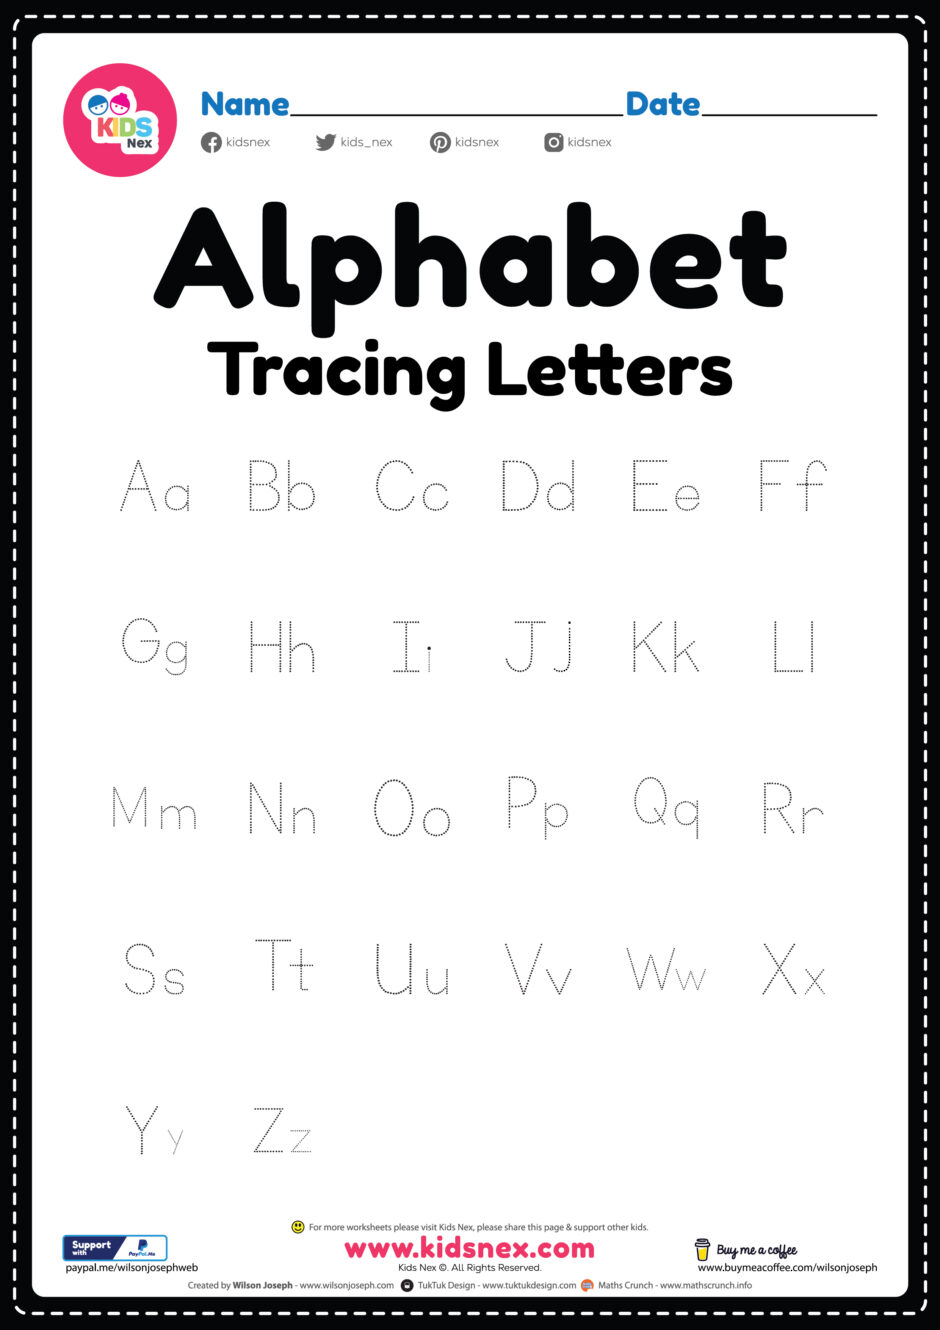 tracing-letters-worksheets-make-your-own-tracinglettersworksheets